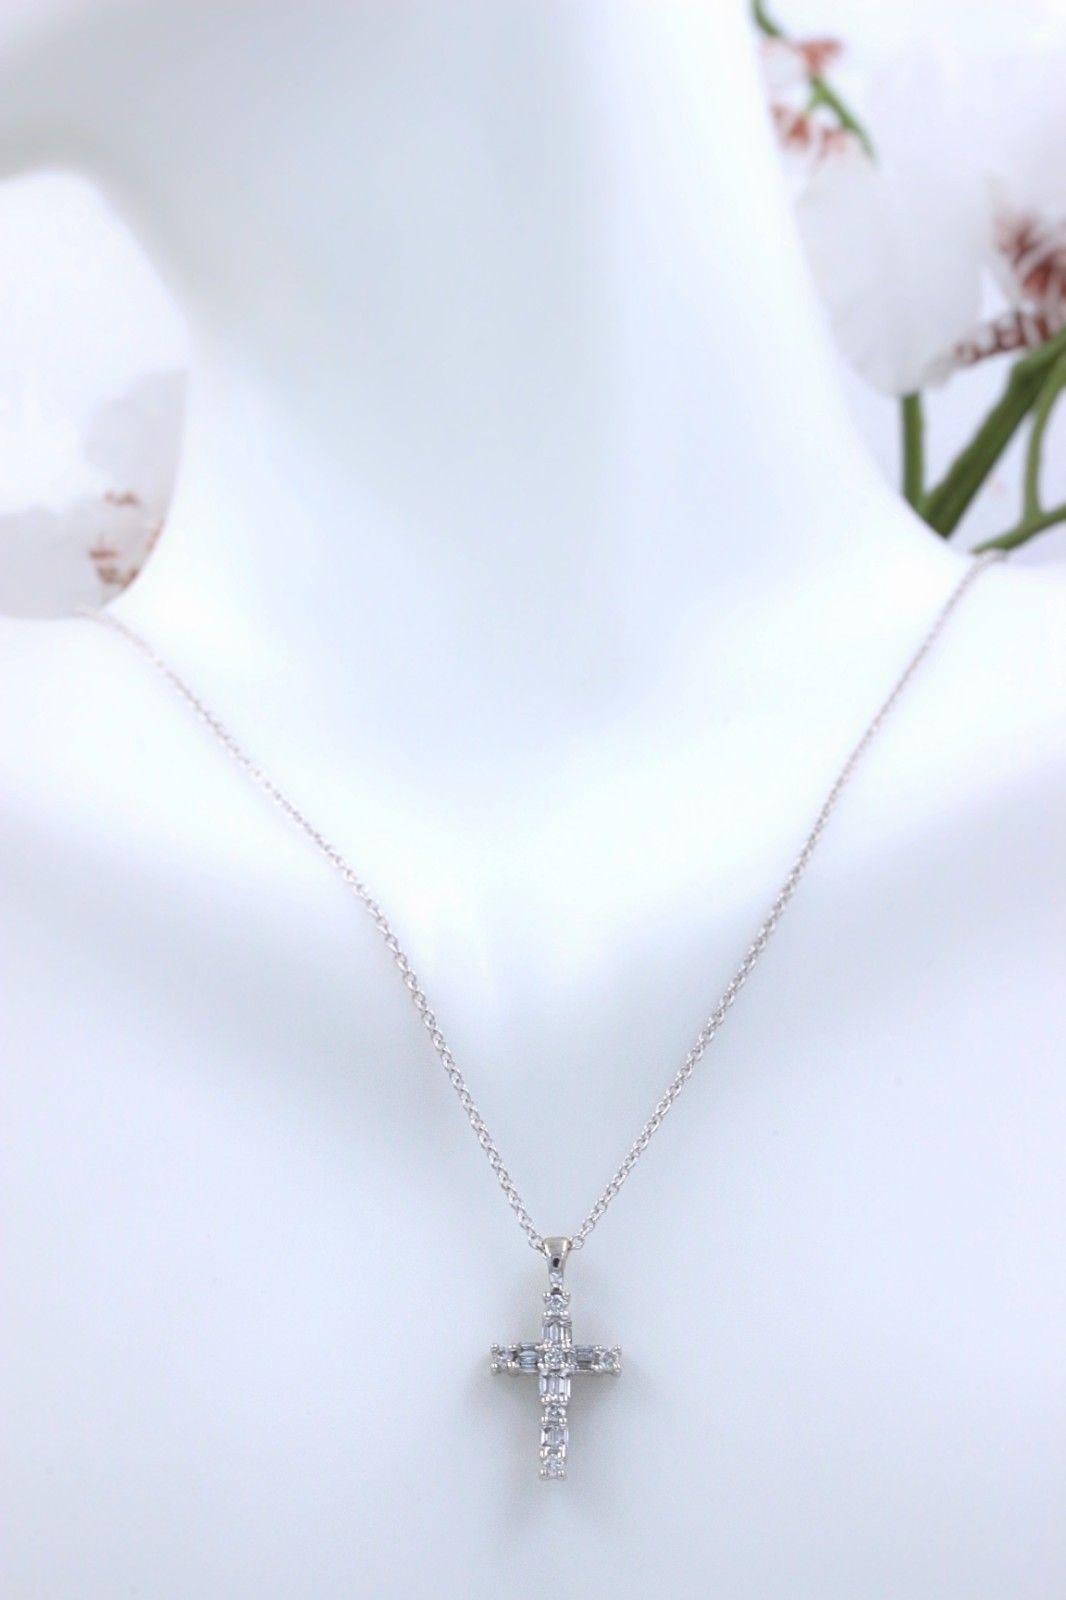 Style: Diamond Cross Pendant Necklace
Metal: 14k White Gold
Measurements:  0.75 inches length and 0.45 inches wide
Necklace Length:  18 inches
Total Carat Weight: 0.50 tcw
Diamond Shape: 6 Round Cut  0.20 tcw and 10 Baguettes 0.30 tcw
Diamond Color